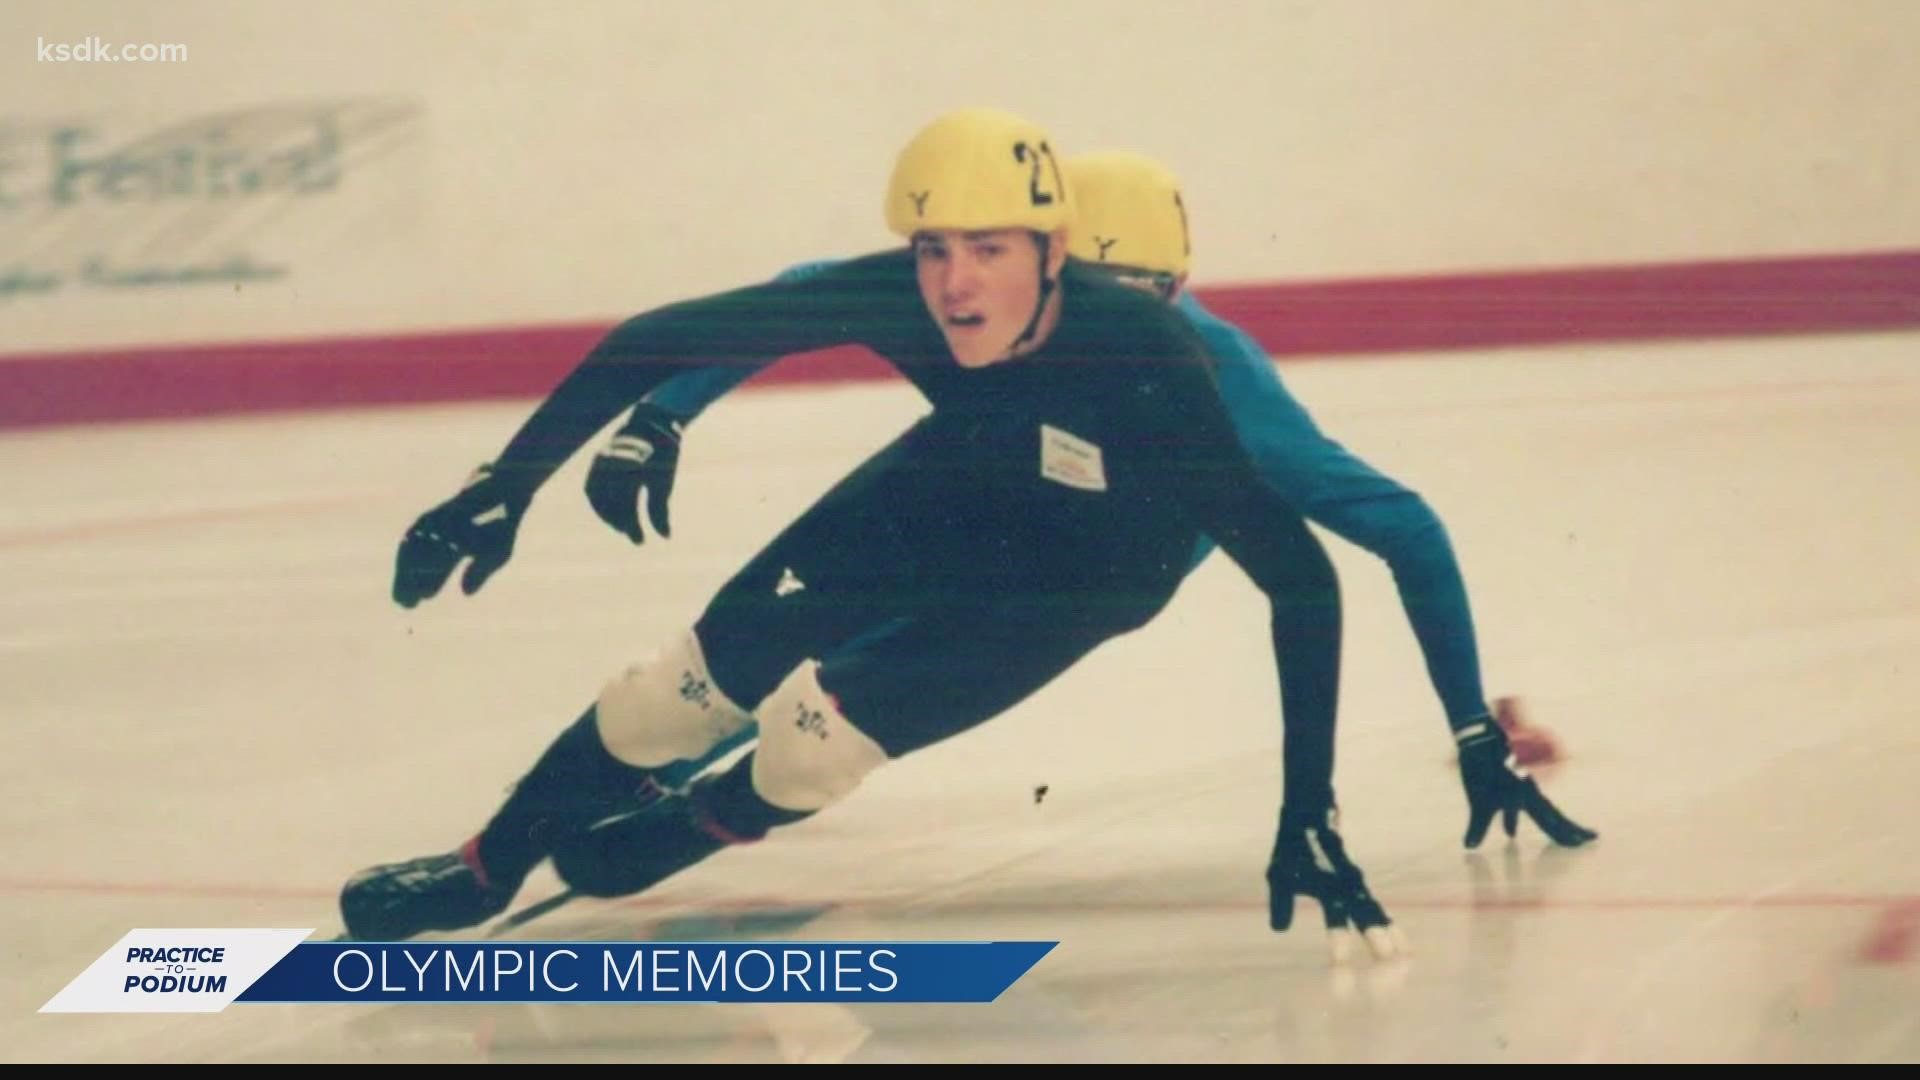 The speedskater represented on Team USA in 1998. After controversy with the 2002 Olympics, O'Hare went on to be successful off the ice.